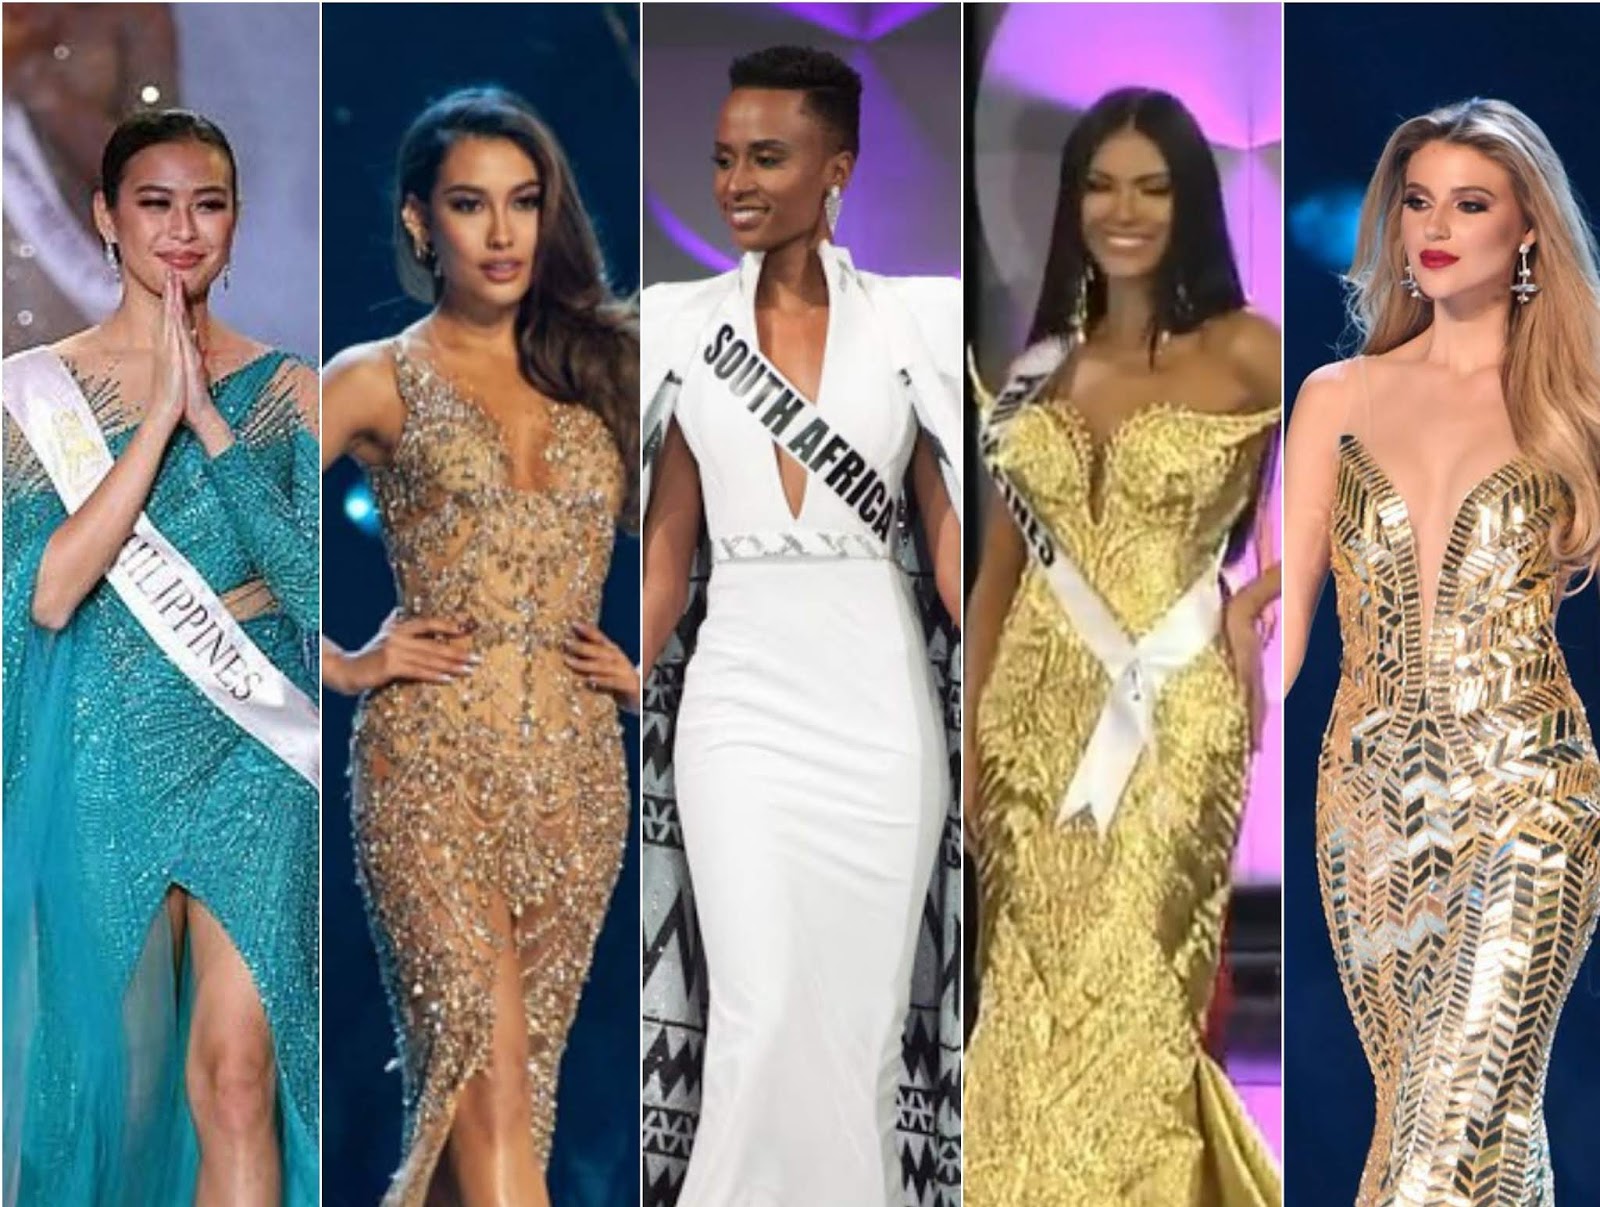 Nick Verreos: SASHES AND TIARAS.....BEST BEAUTY PAGEANT GOWNS of 2019: My  TOP BEST RECAP!